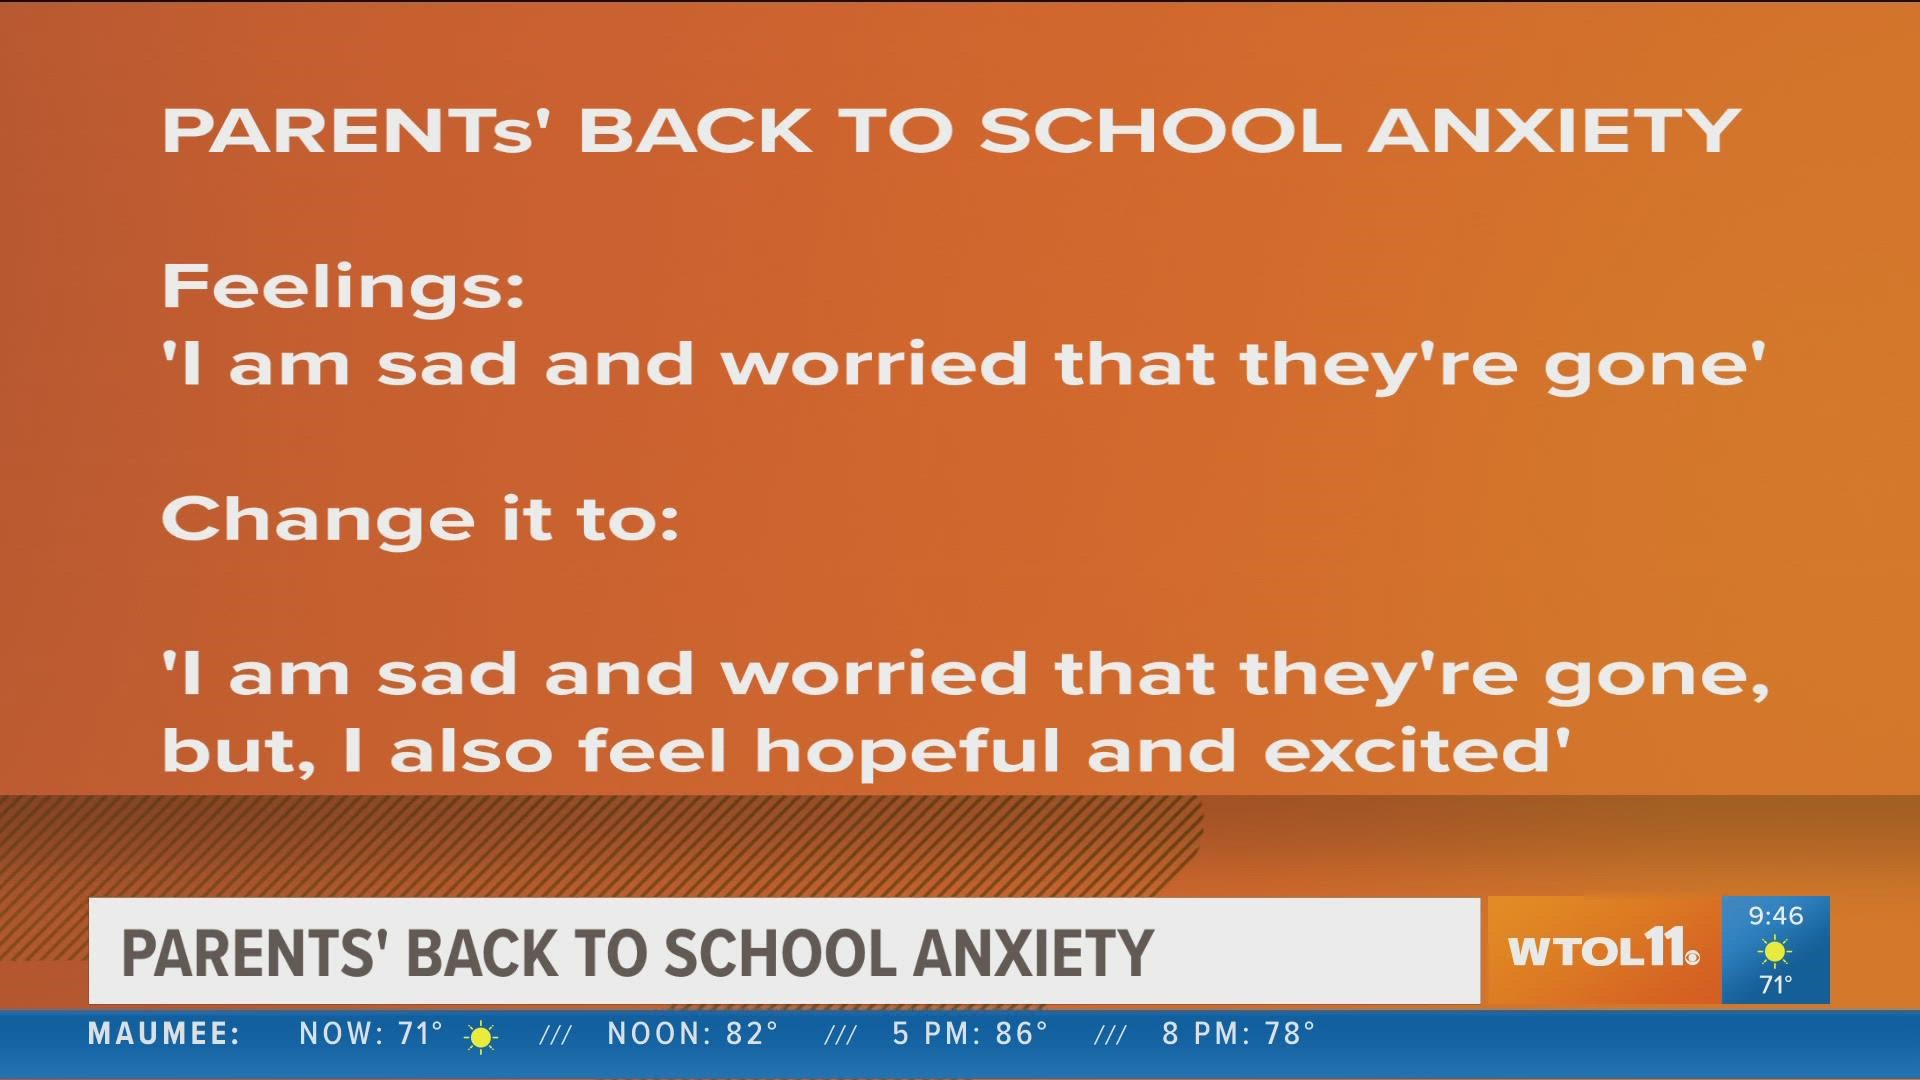 Amber Withrow with Milan Christian Counseling talks on how parents can handle anxious feelings as children go off to college and leave the nest.